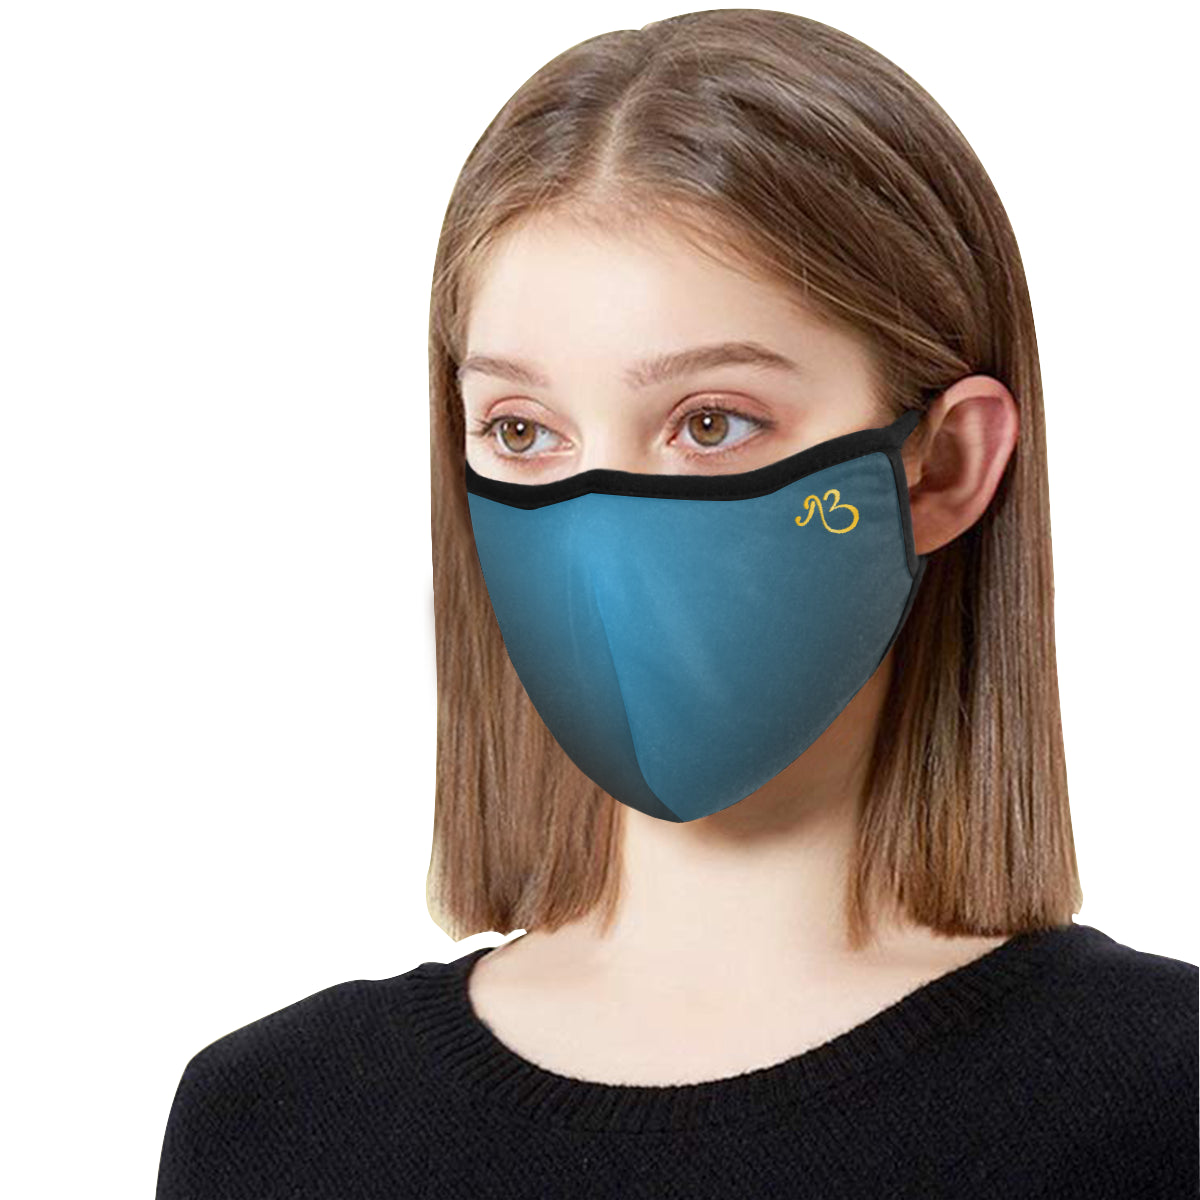 flyersetcinc Sky Blue Galaxy Cotton Fabric Face Mask with filter slot (30 Filters Included) - Non-medical use